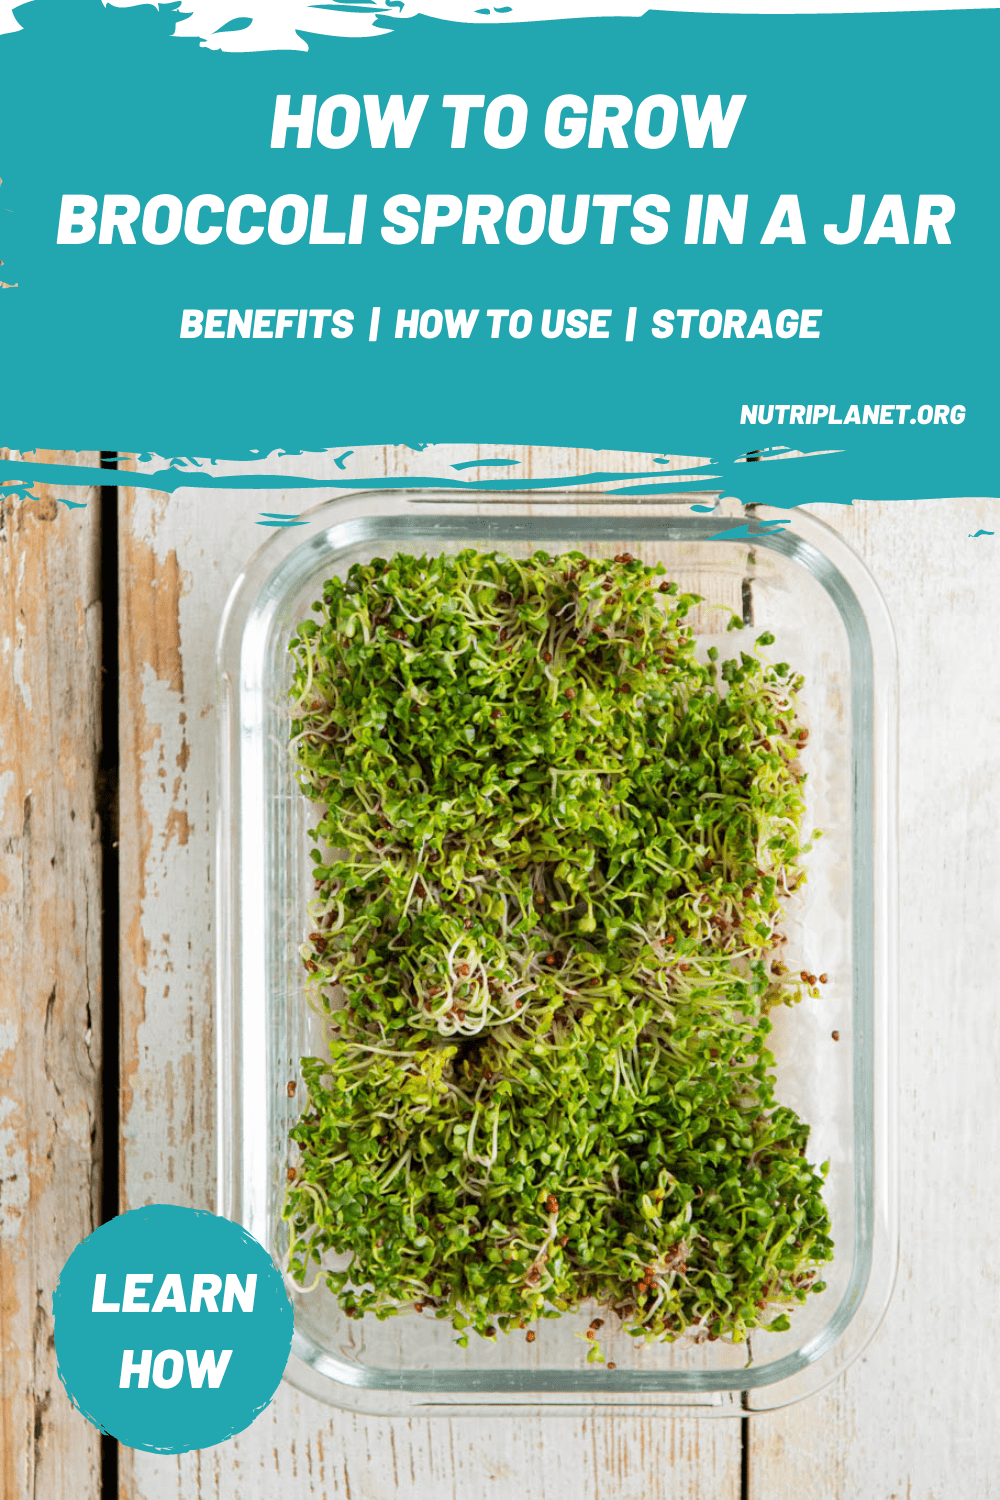 Learn how to grow broccoli sprouts in a jar at home. In addition, read up on broccoli sprouts benefits, how to store, and how to use sprouted broccoli. 